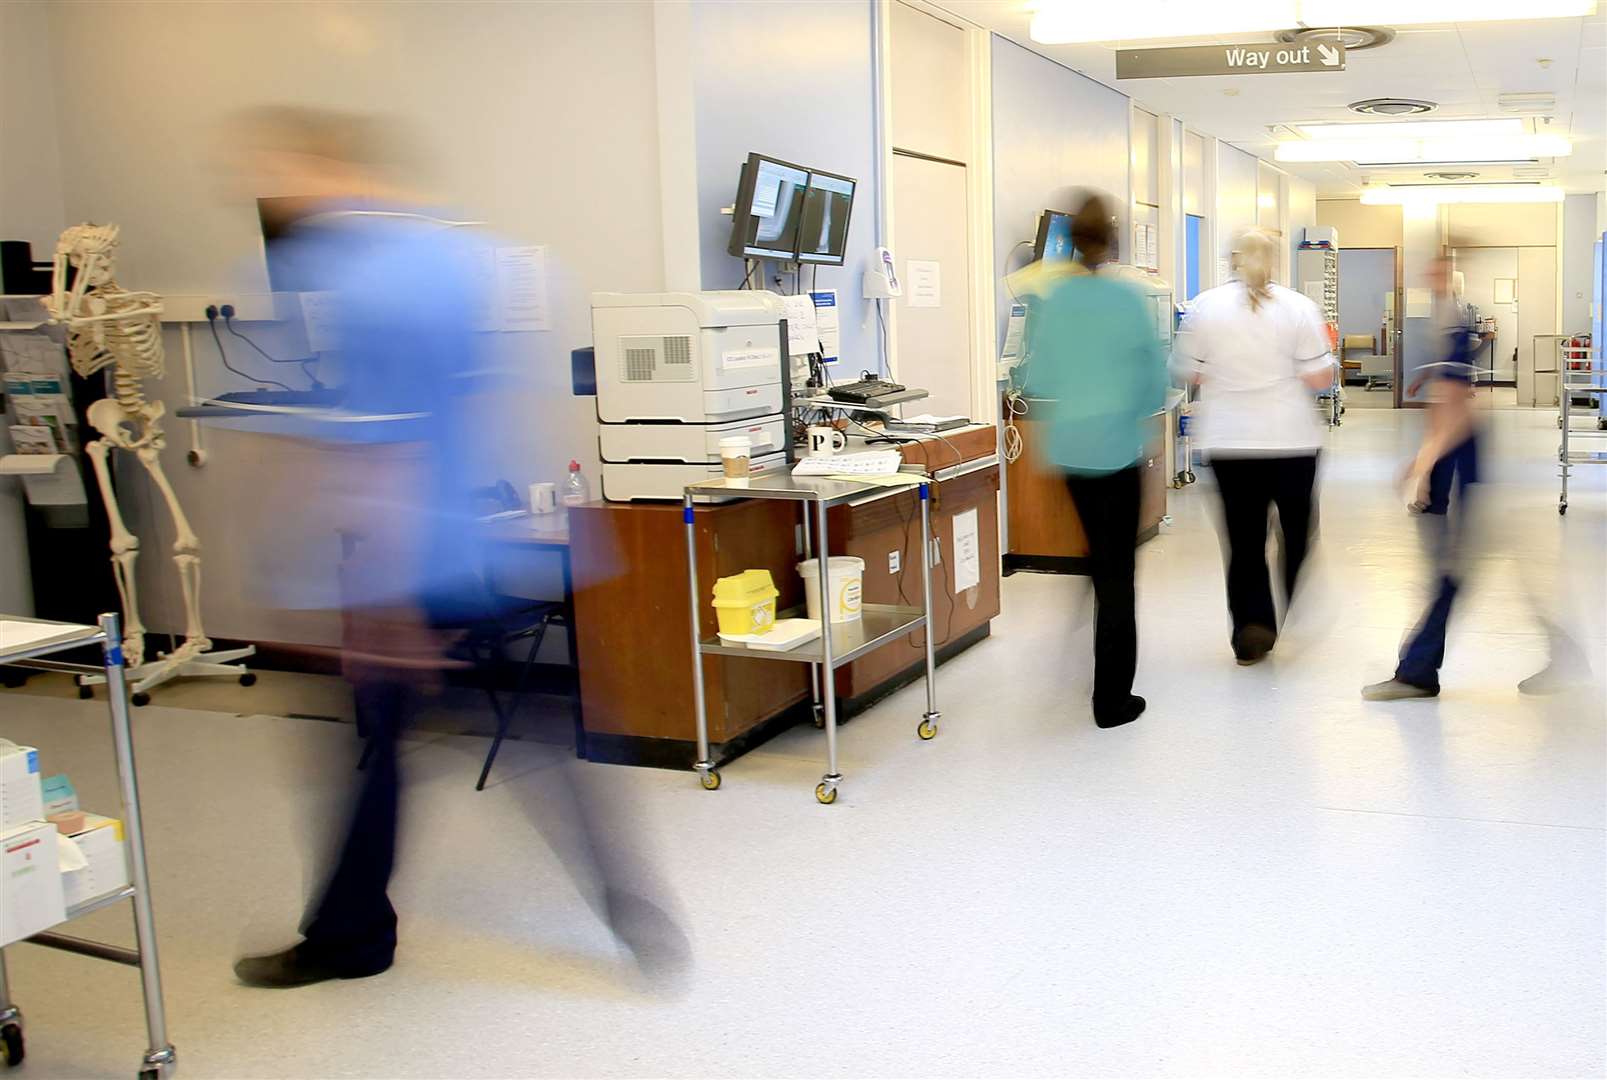 NHS staff have been facing 'winter-style pressures' for months, say union bosses